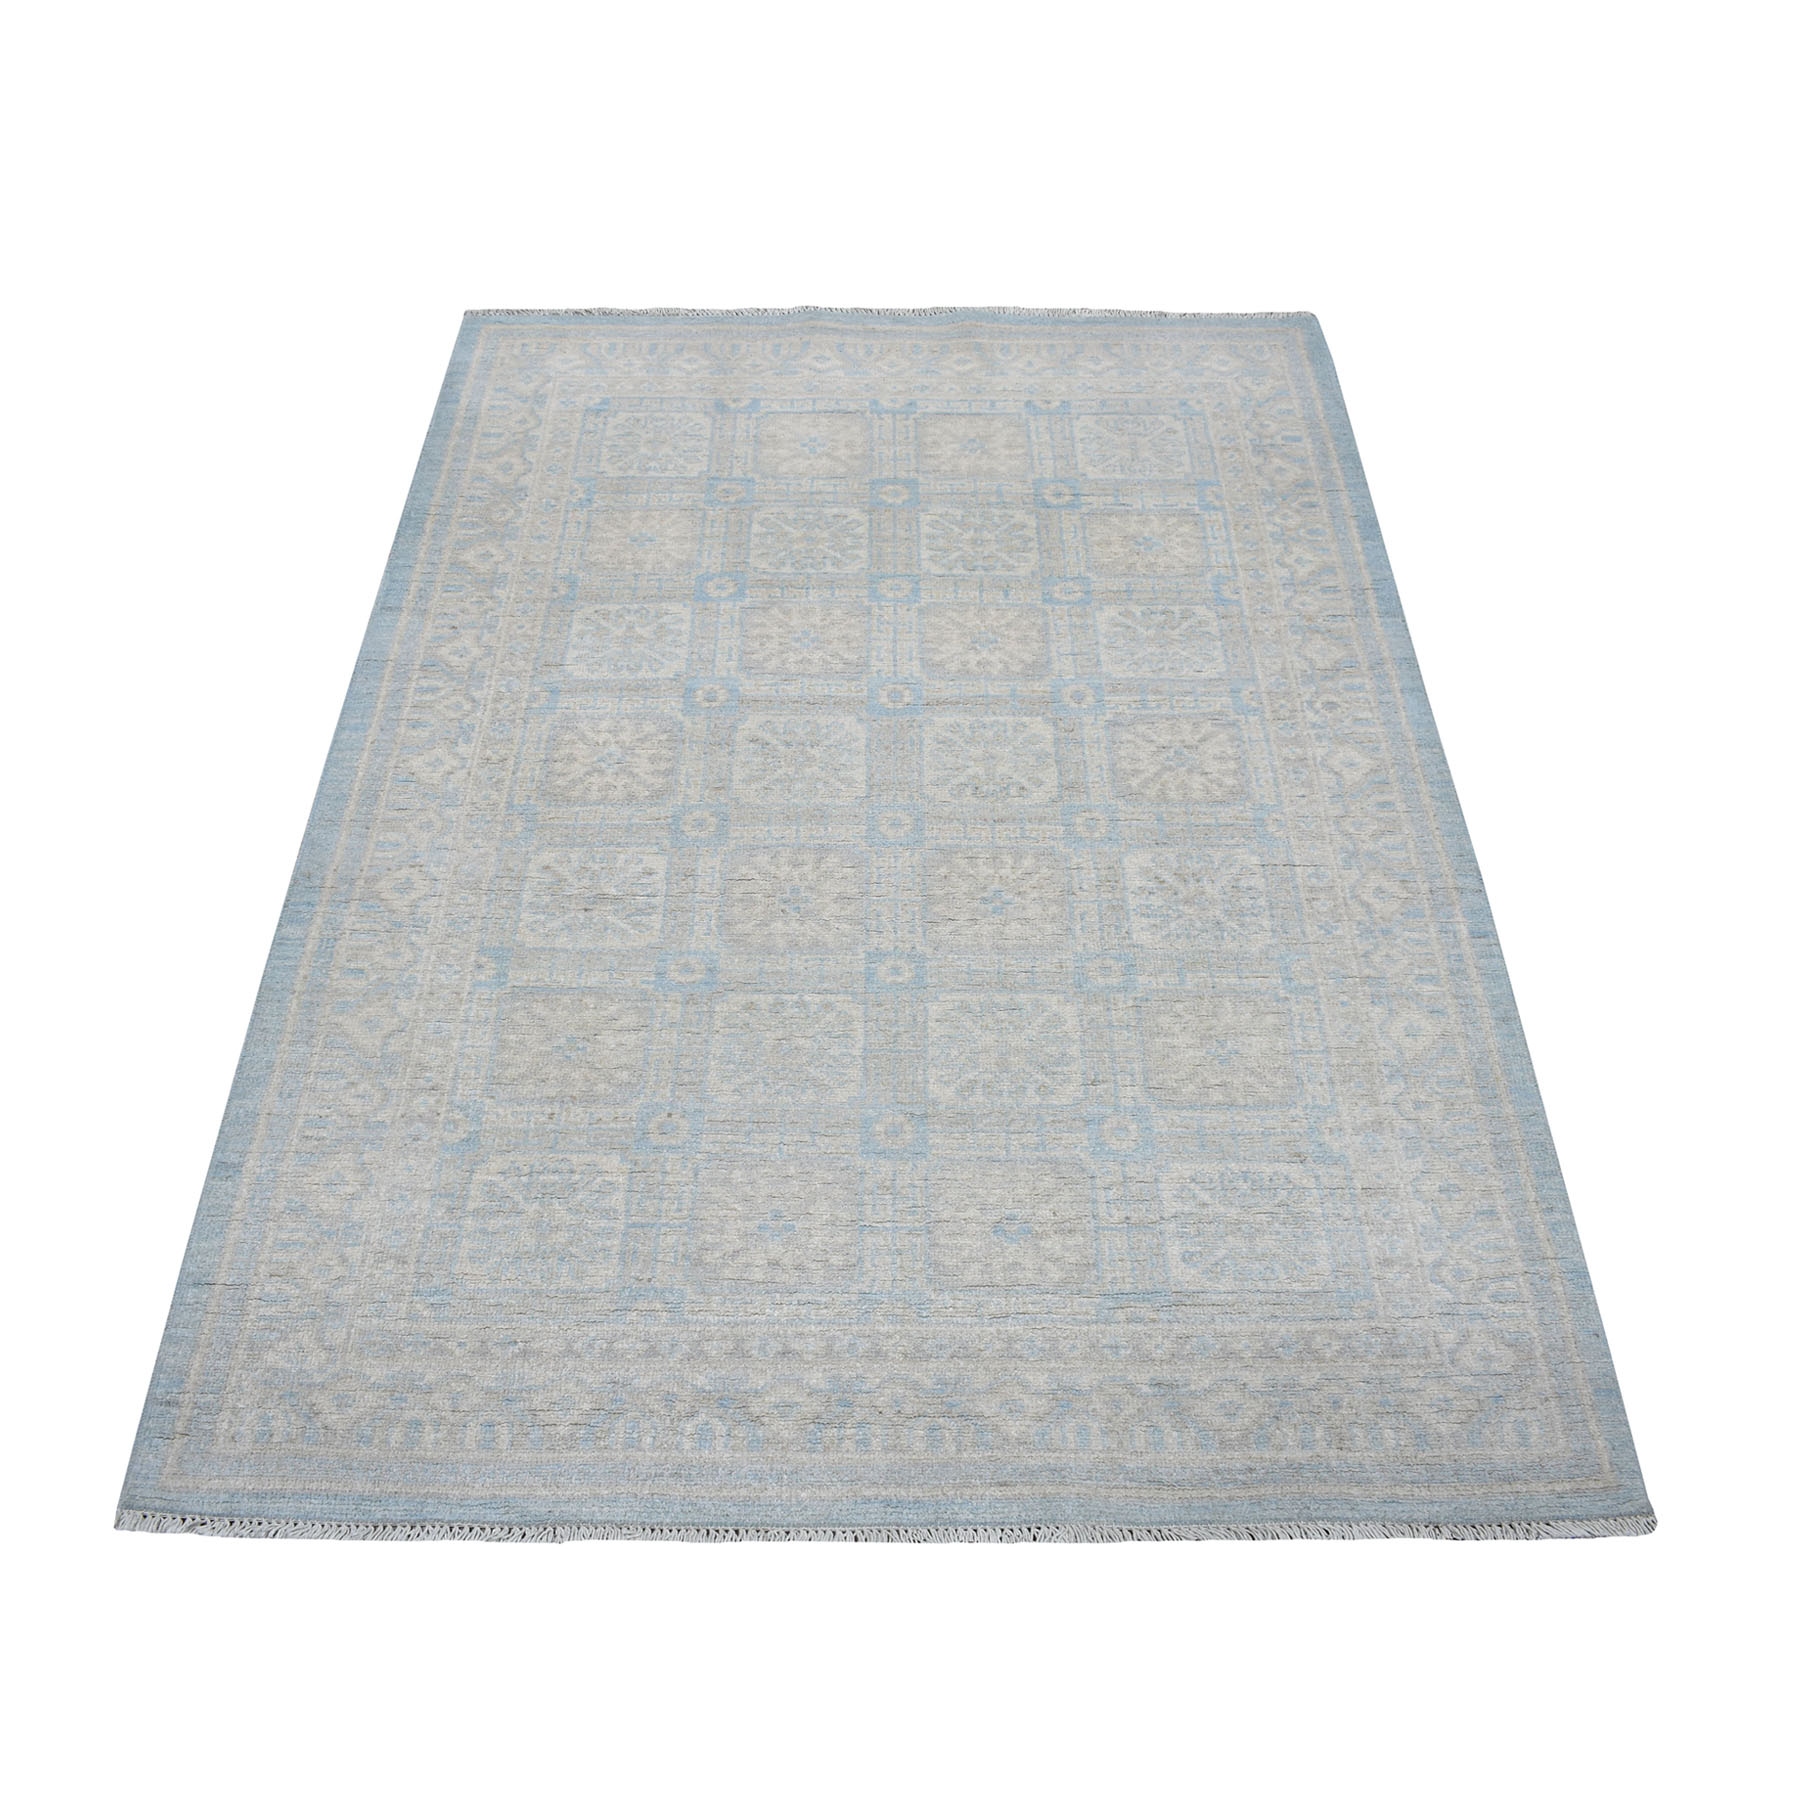 4'X5'9" Samarkand With Khotan Repetitive Rossets Design Hand Knotted Oriental Rug moaec9ca